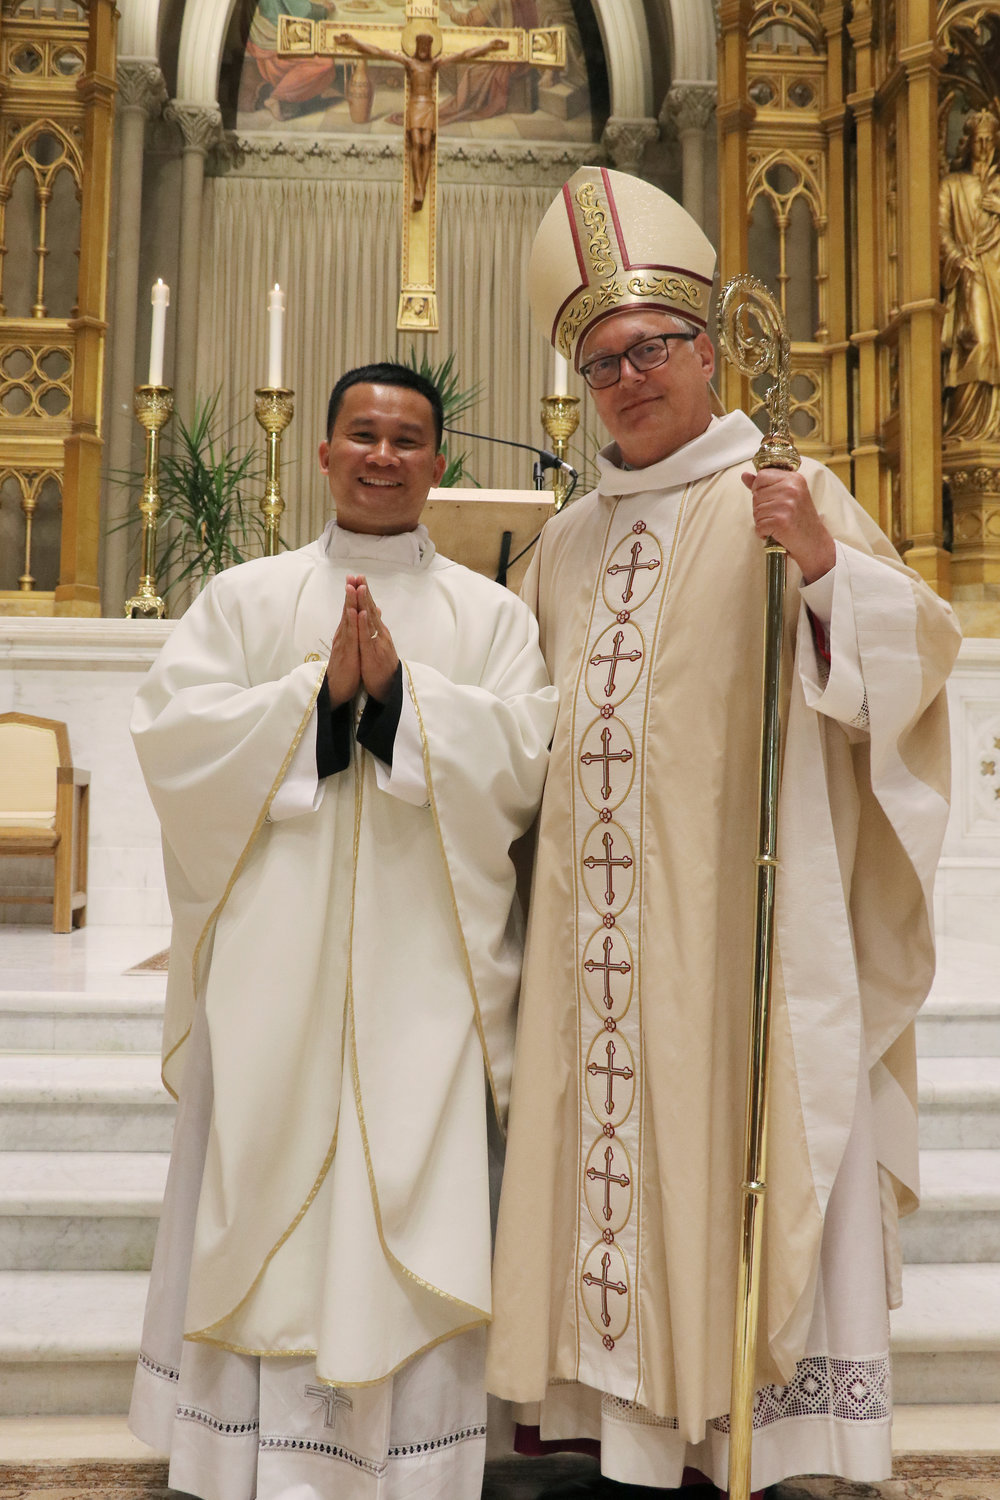 Father Hiep Van Nguyen ordained by Bishop Thomas J. Tobin on June 6, 2020 in the Cathedral of SS. Peter and Paul.